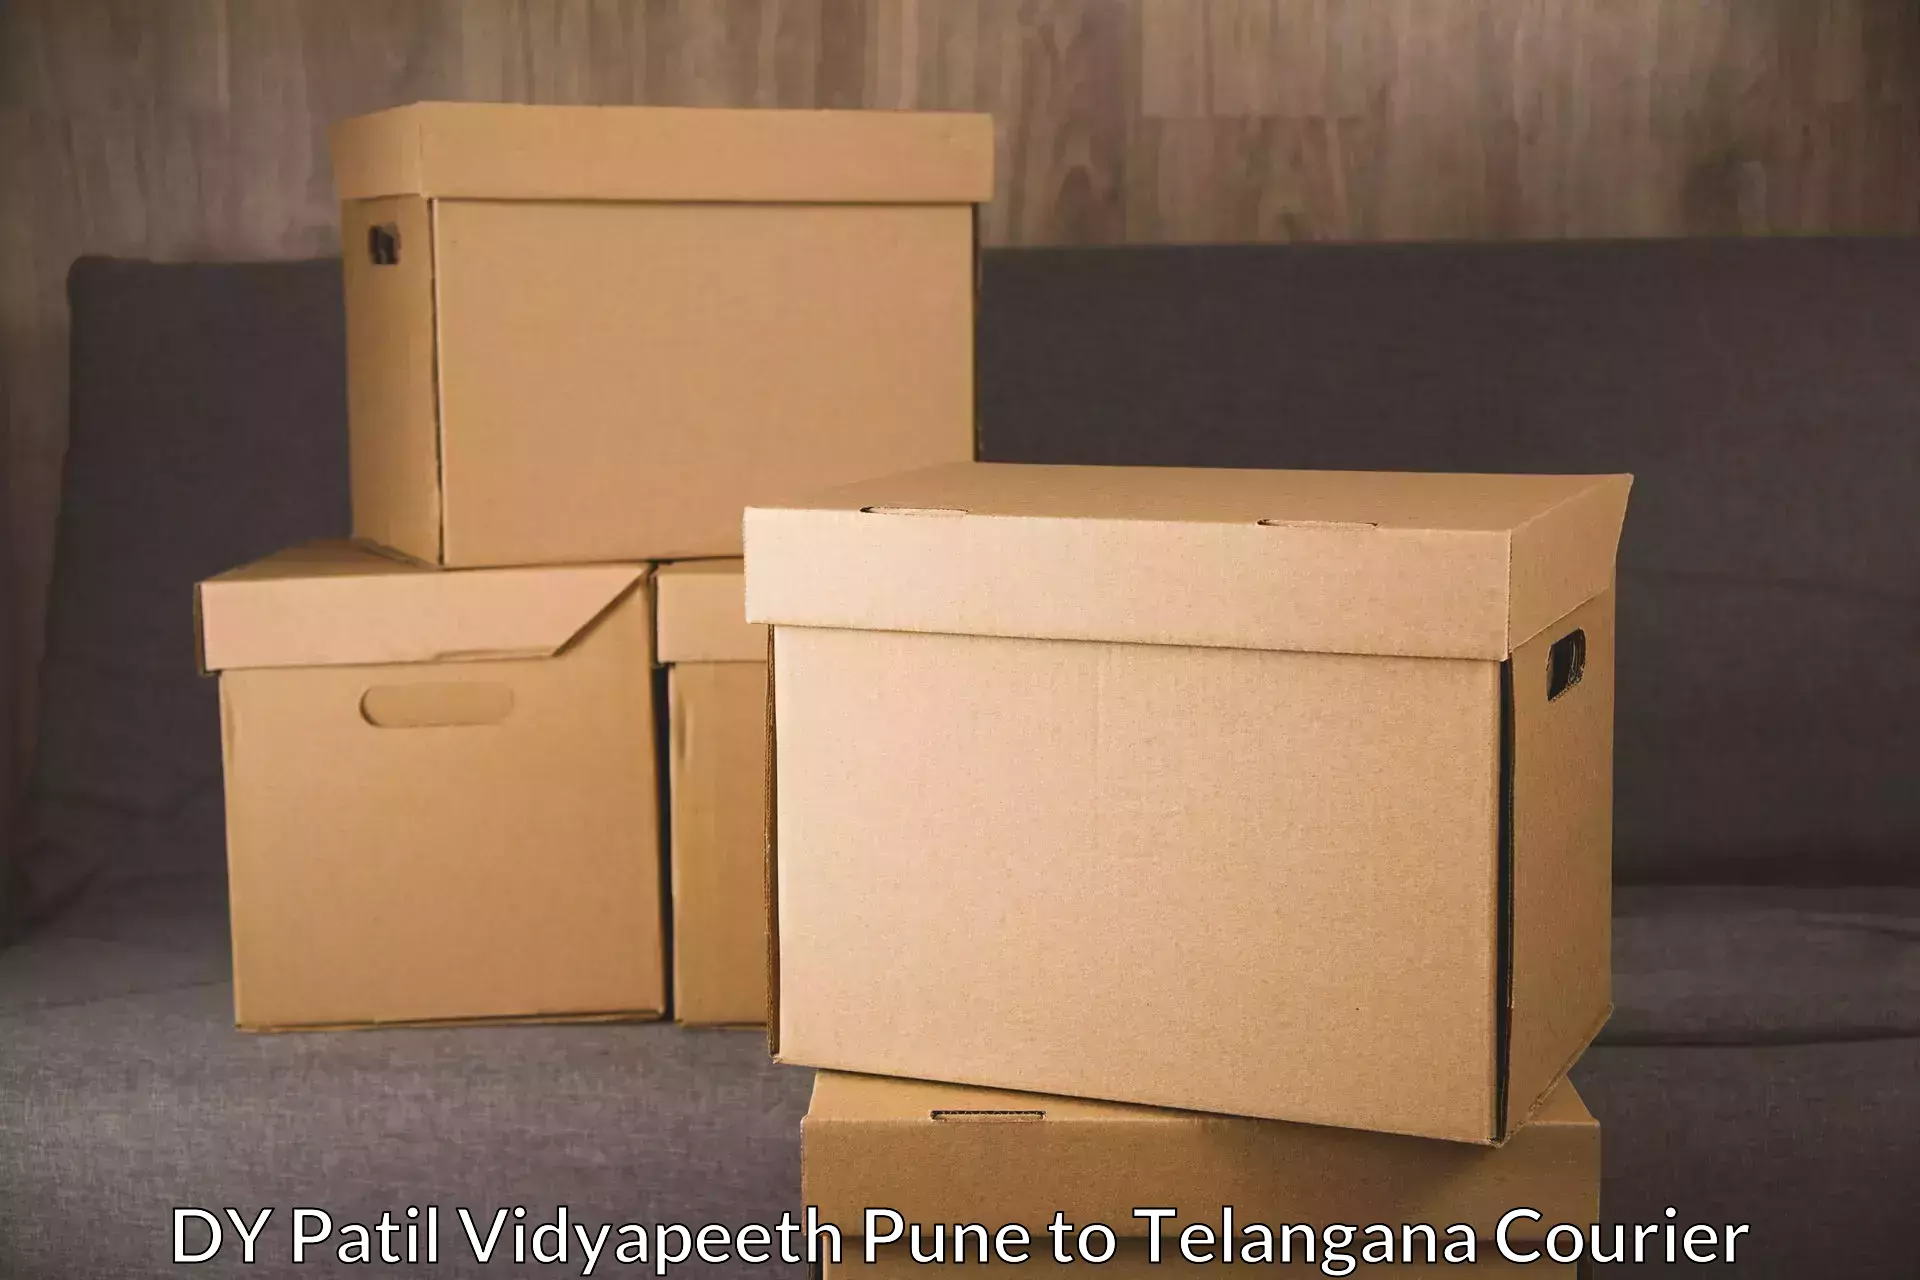 International courier rates DY Patil Vidyapeeth Pune to Mogulla Pally